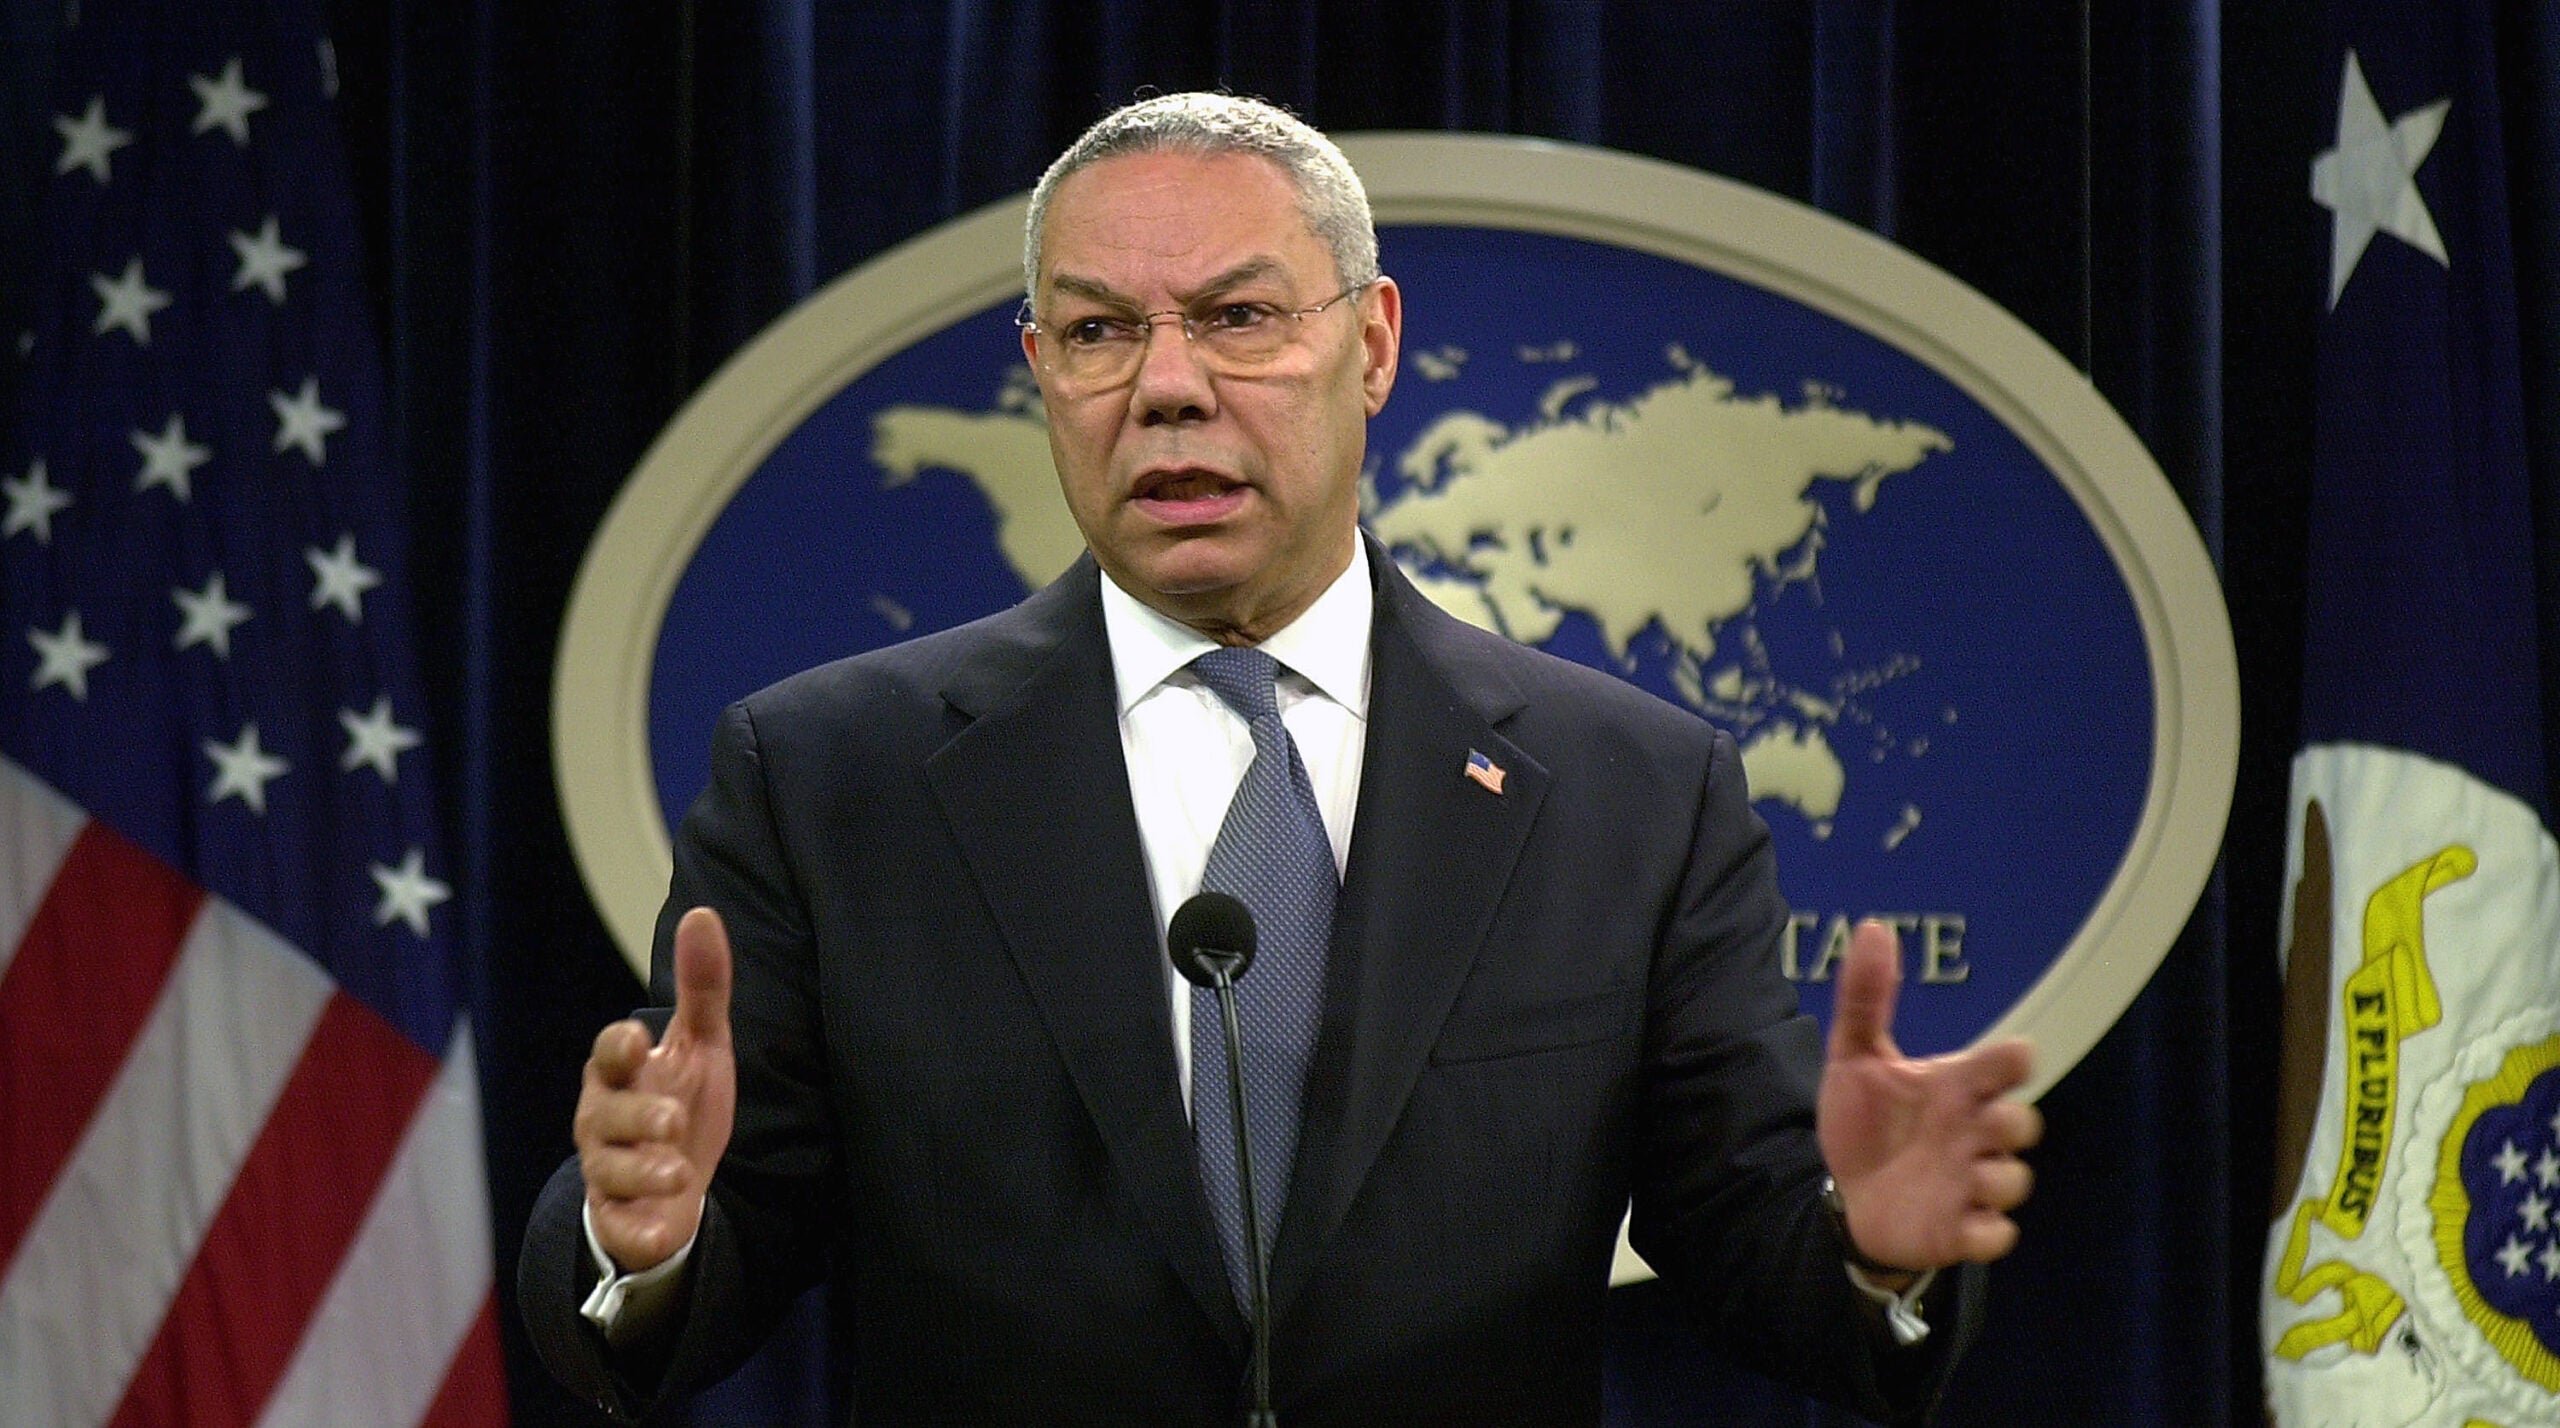 WASHINGTON - MARCH 31:  U.S. Secretary of State Colin Powell speaks at the State Department March 31, 2003 in Washington, D.C. Powell  travels to Ankara, Turkey April 1 in an effort to patch up relations after the U.S. was initially refused permission to base land troops there ahead of the Iraq war. From there, Powell is scheduled to travel to Brussels, Belgium April 3  for a round of talks with European leaders.  (Photo by Stefan Zaklin/Getty Images)